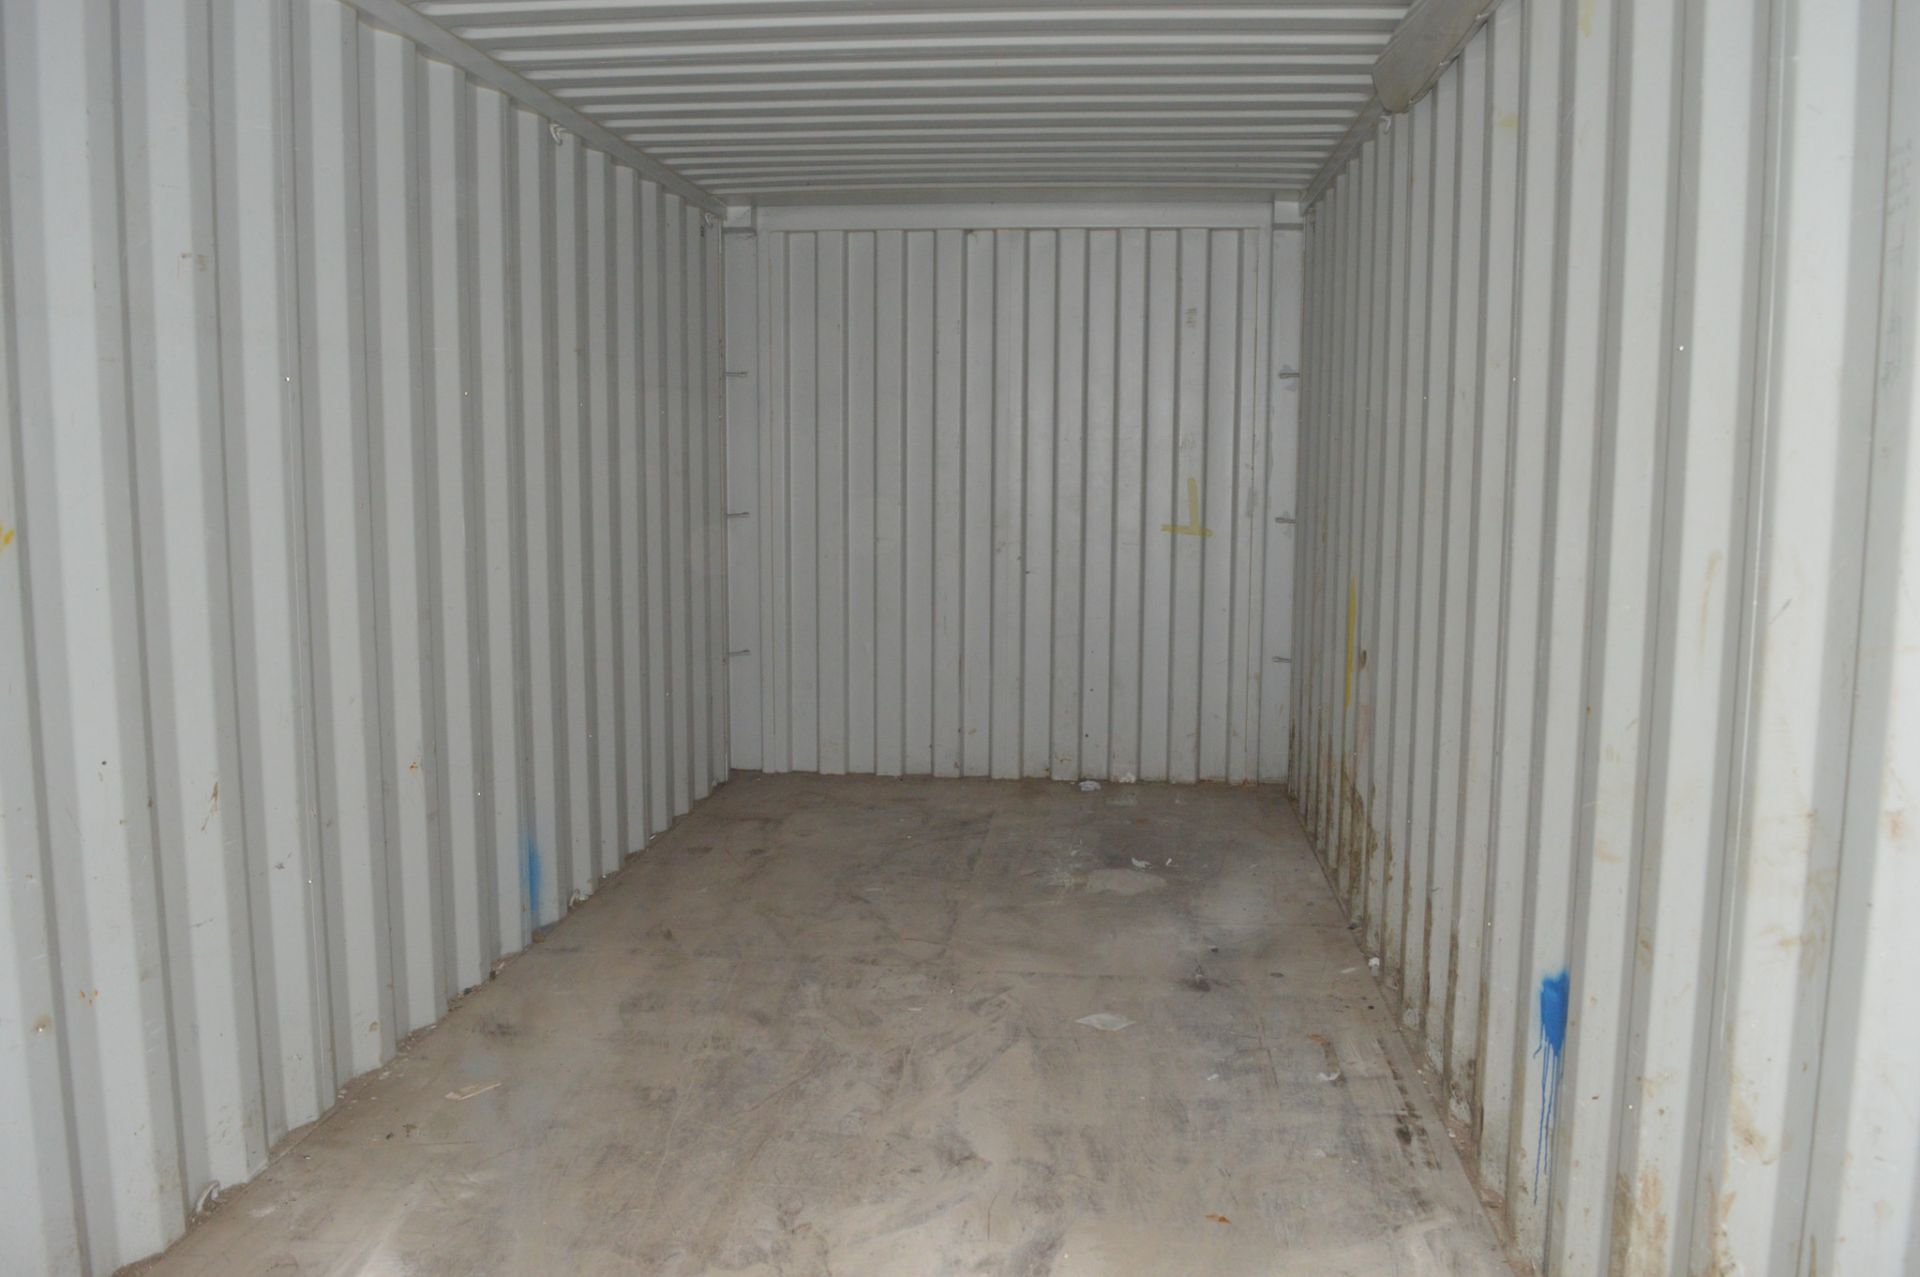 20 ft x 8 ft steel anti vandal shipping container BB34655 - Image 5 of 6